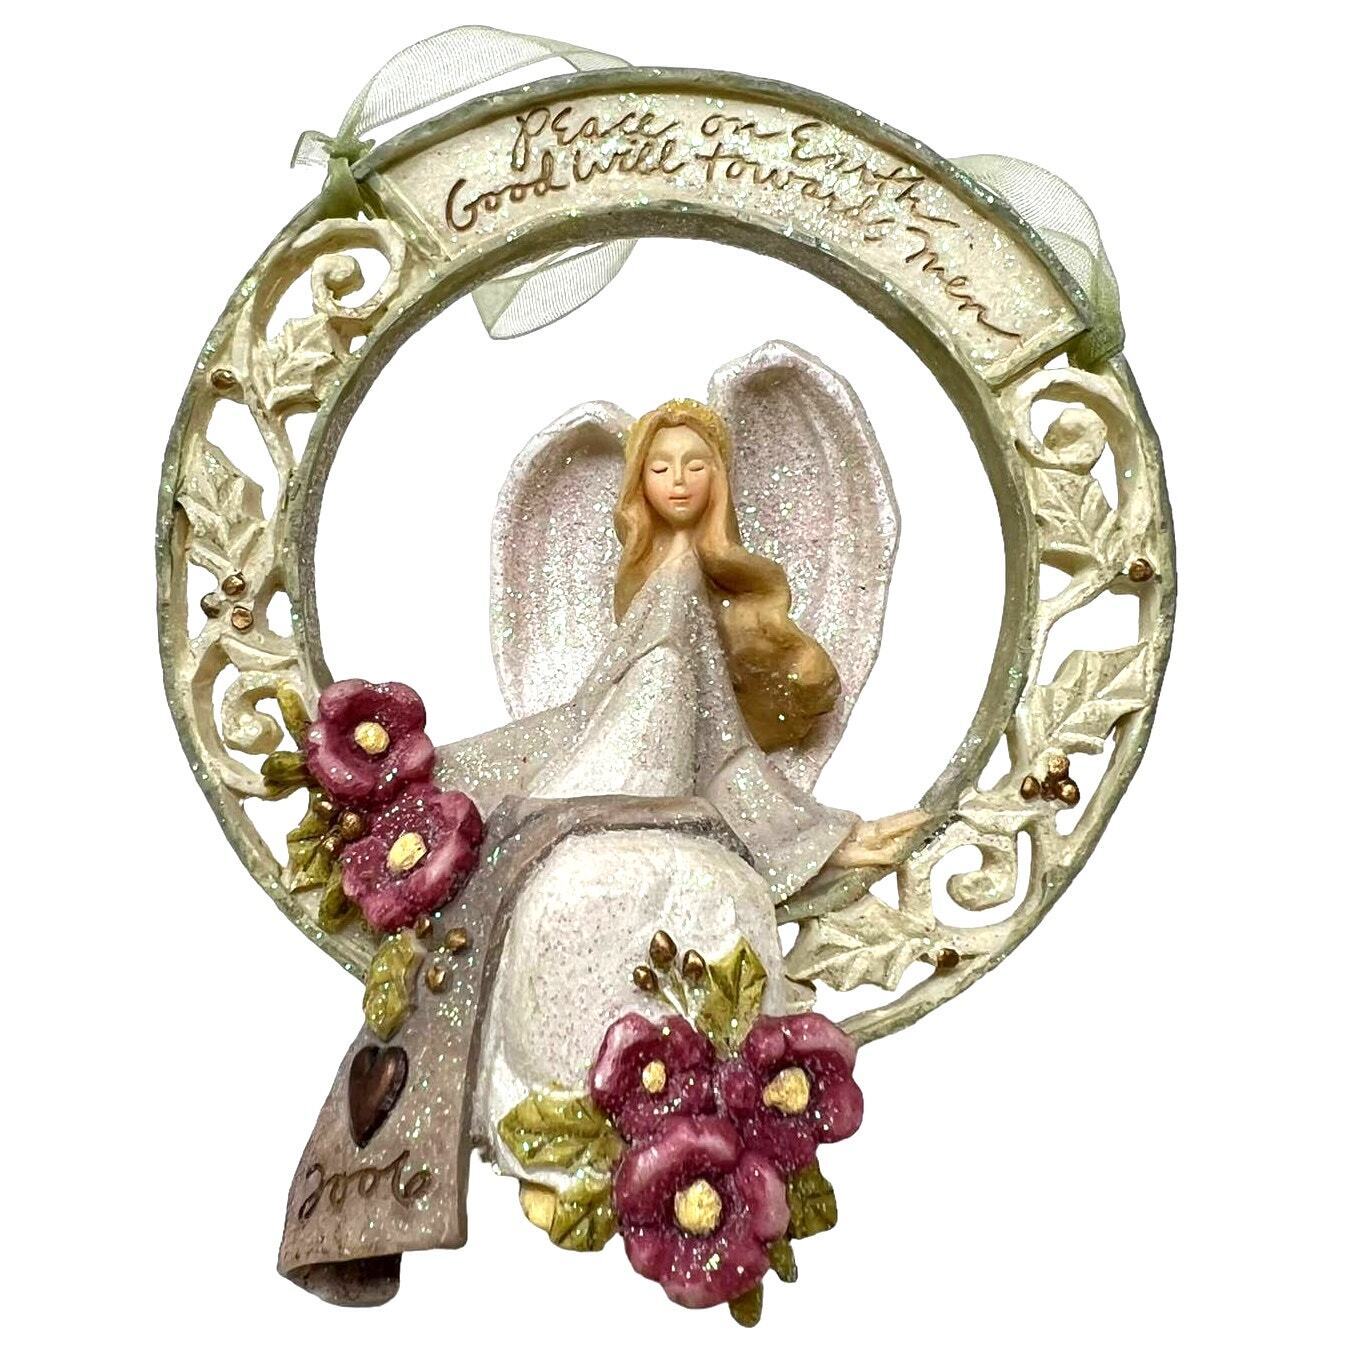 ENESCO Foundations Angel Collection Hanging Wreath Ornament 2006 Peace on Earth